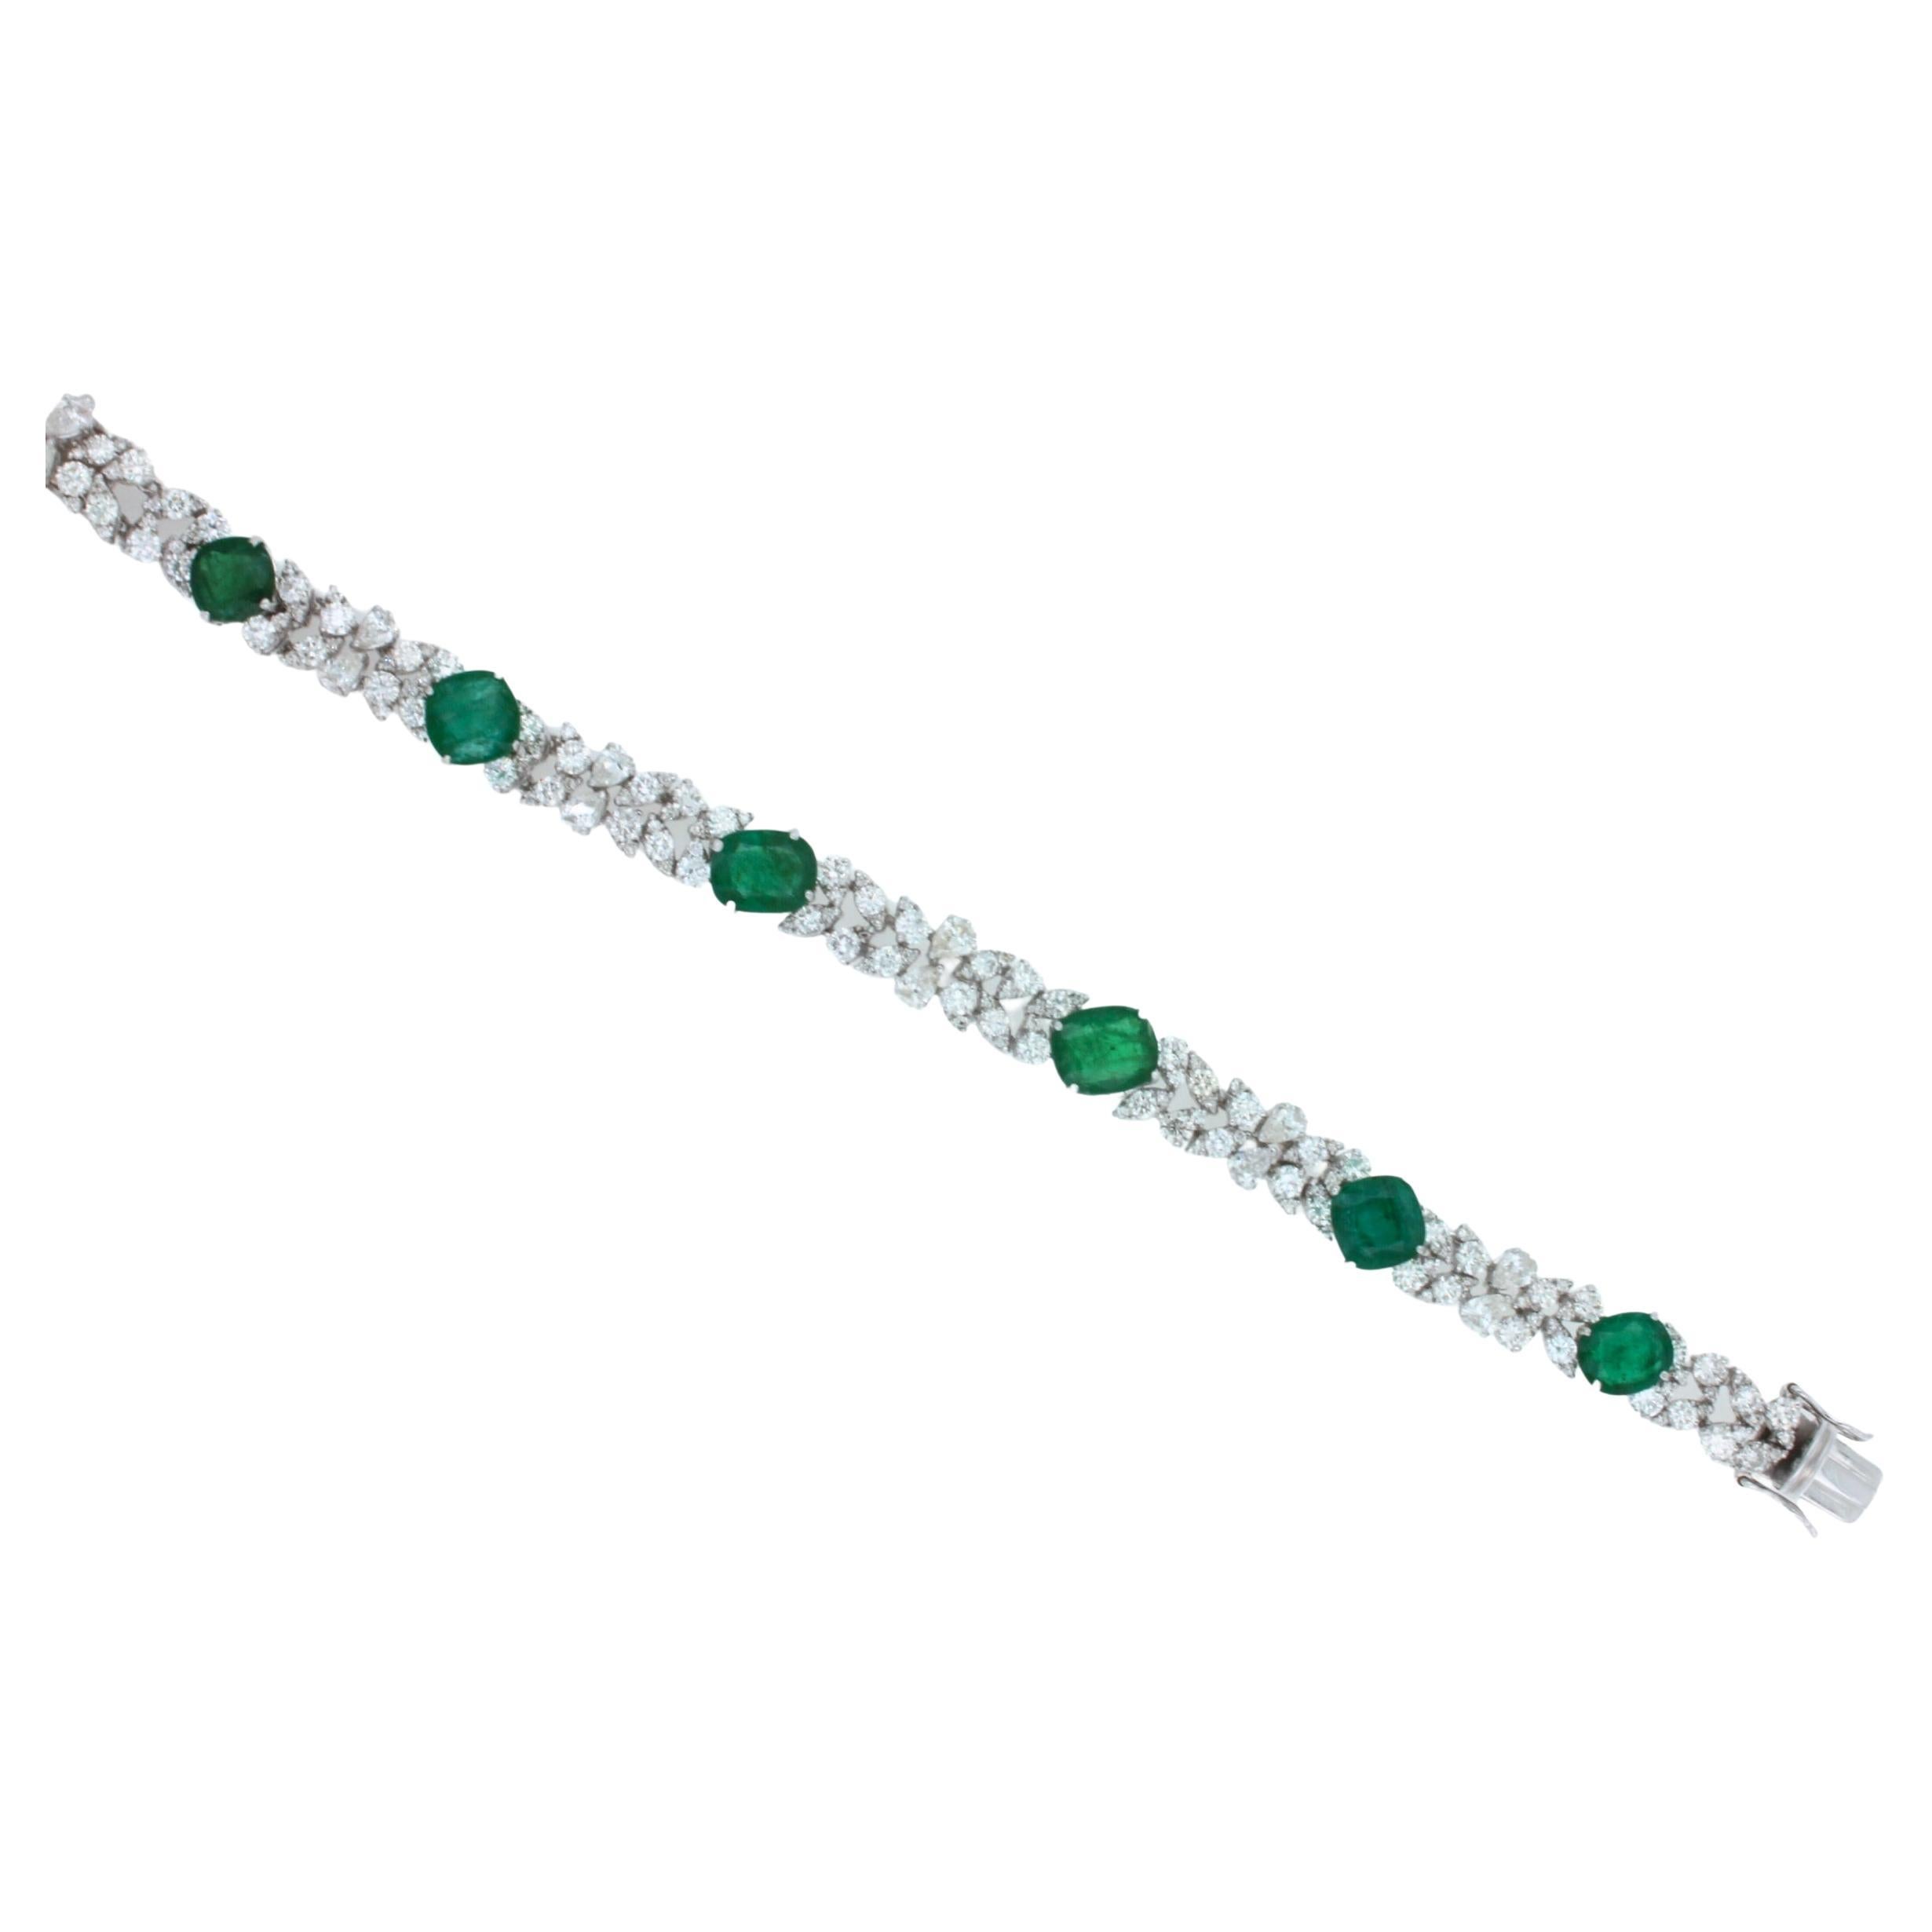 Multi Fancy Shape Green Emerald Diamond 18 Karat White Gold Tennis Bracelet
8.00 Ctw Emeralds with Deep Green & Forest Green Colors/Hues
Very Beautiful & Mystical
6.00 Ctw G/VS Fancy Shape Diamonds
18 Karat White Gold
Length: 7 Inches 
